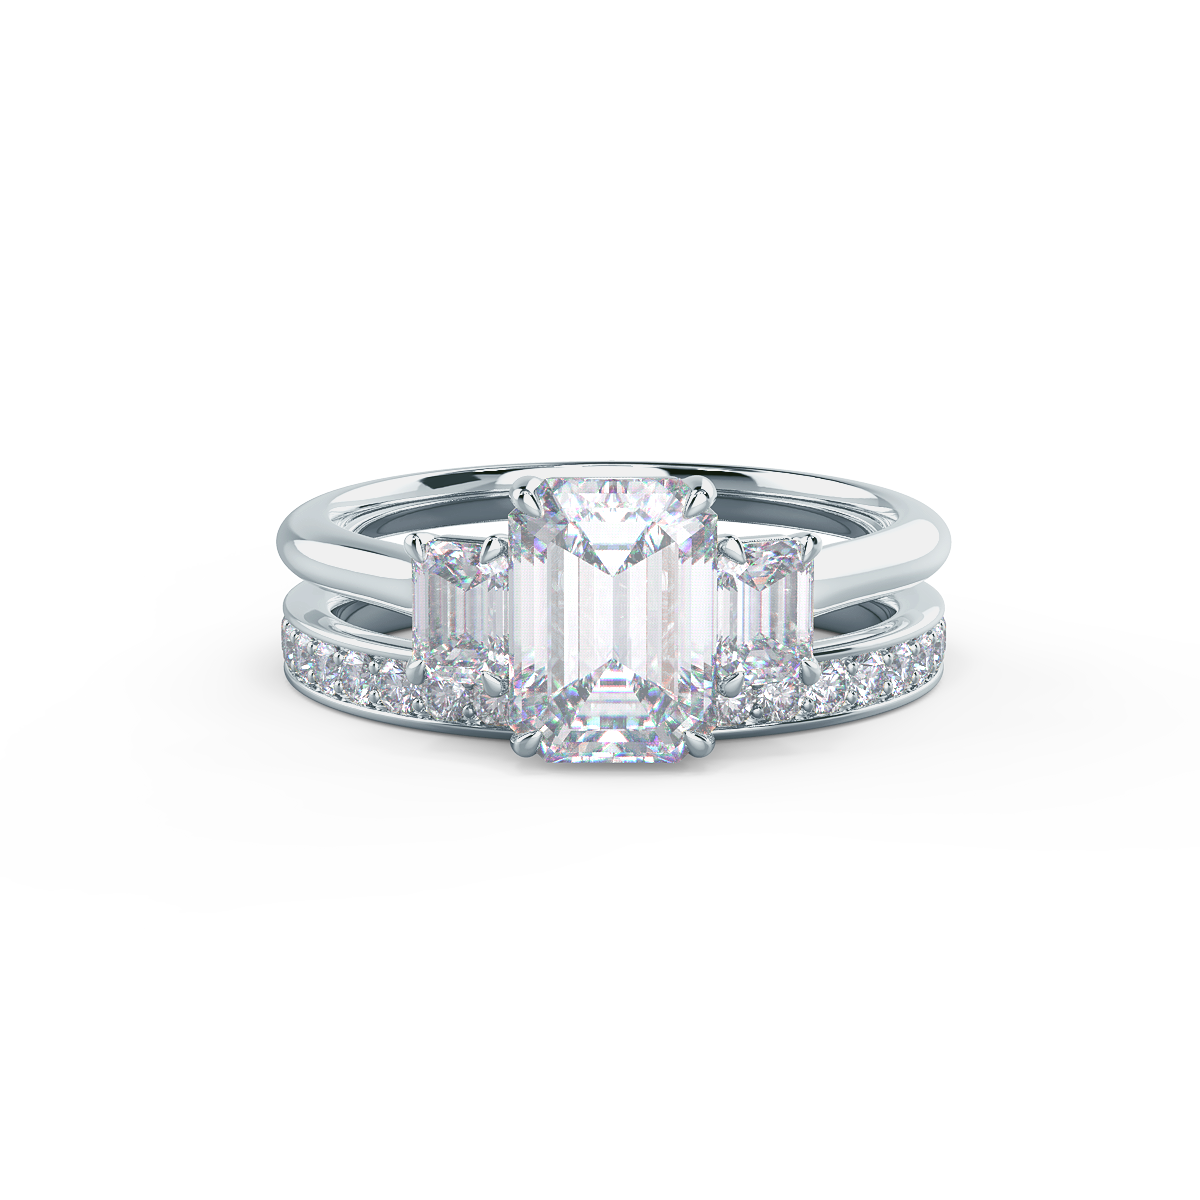  This setting allows a wedding band to sit nearly flush.    Shop All Wedding Bands   